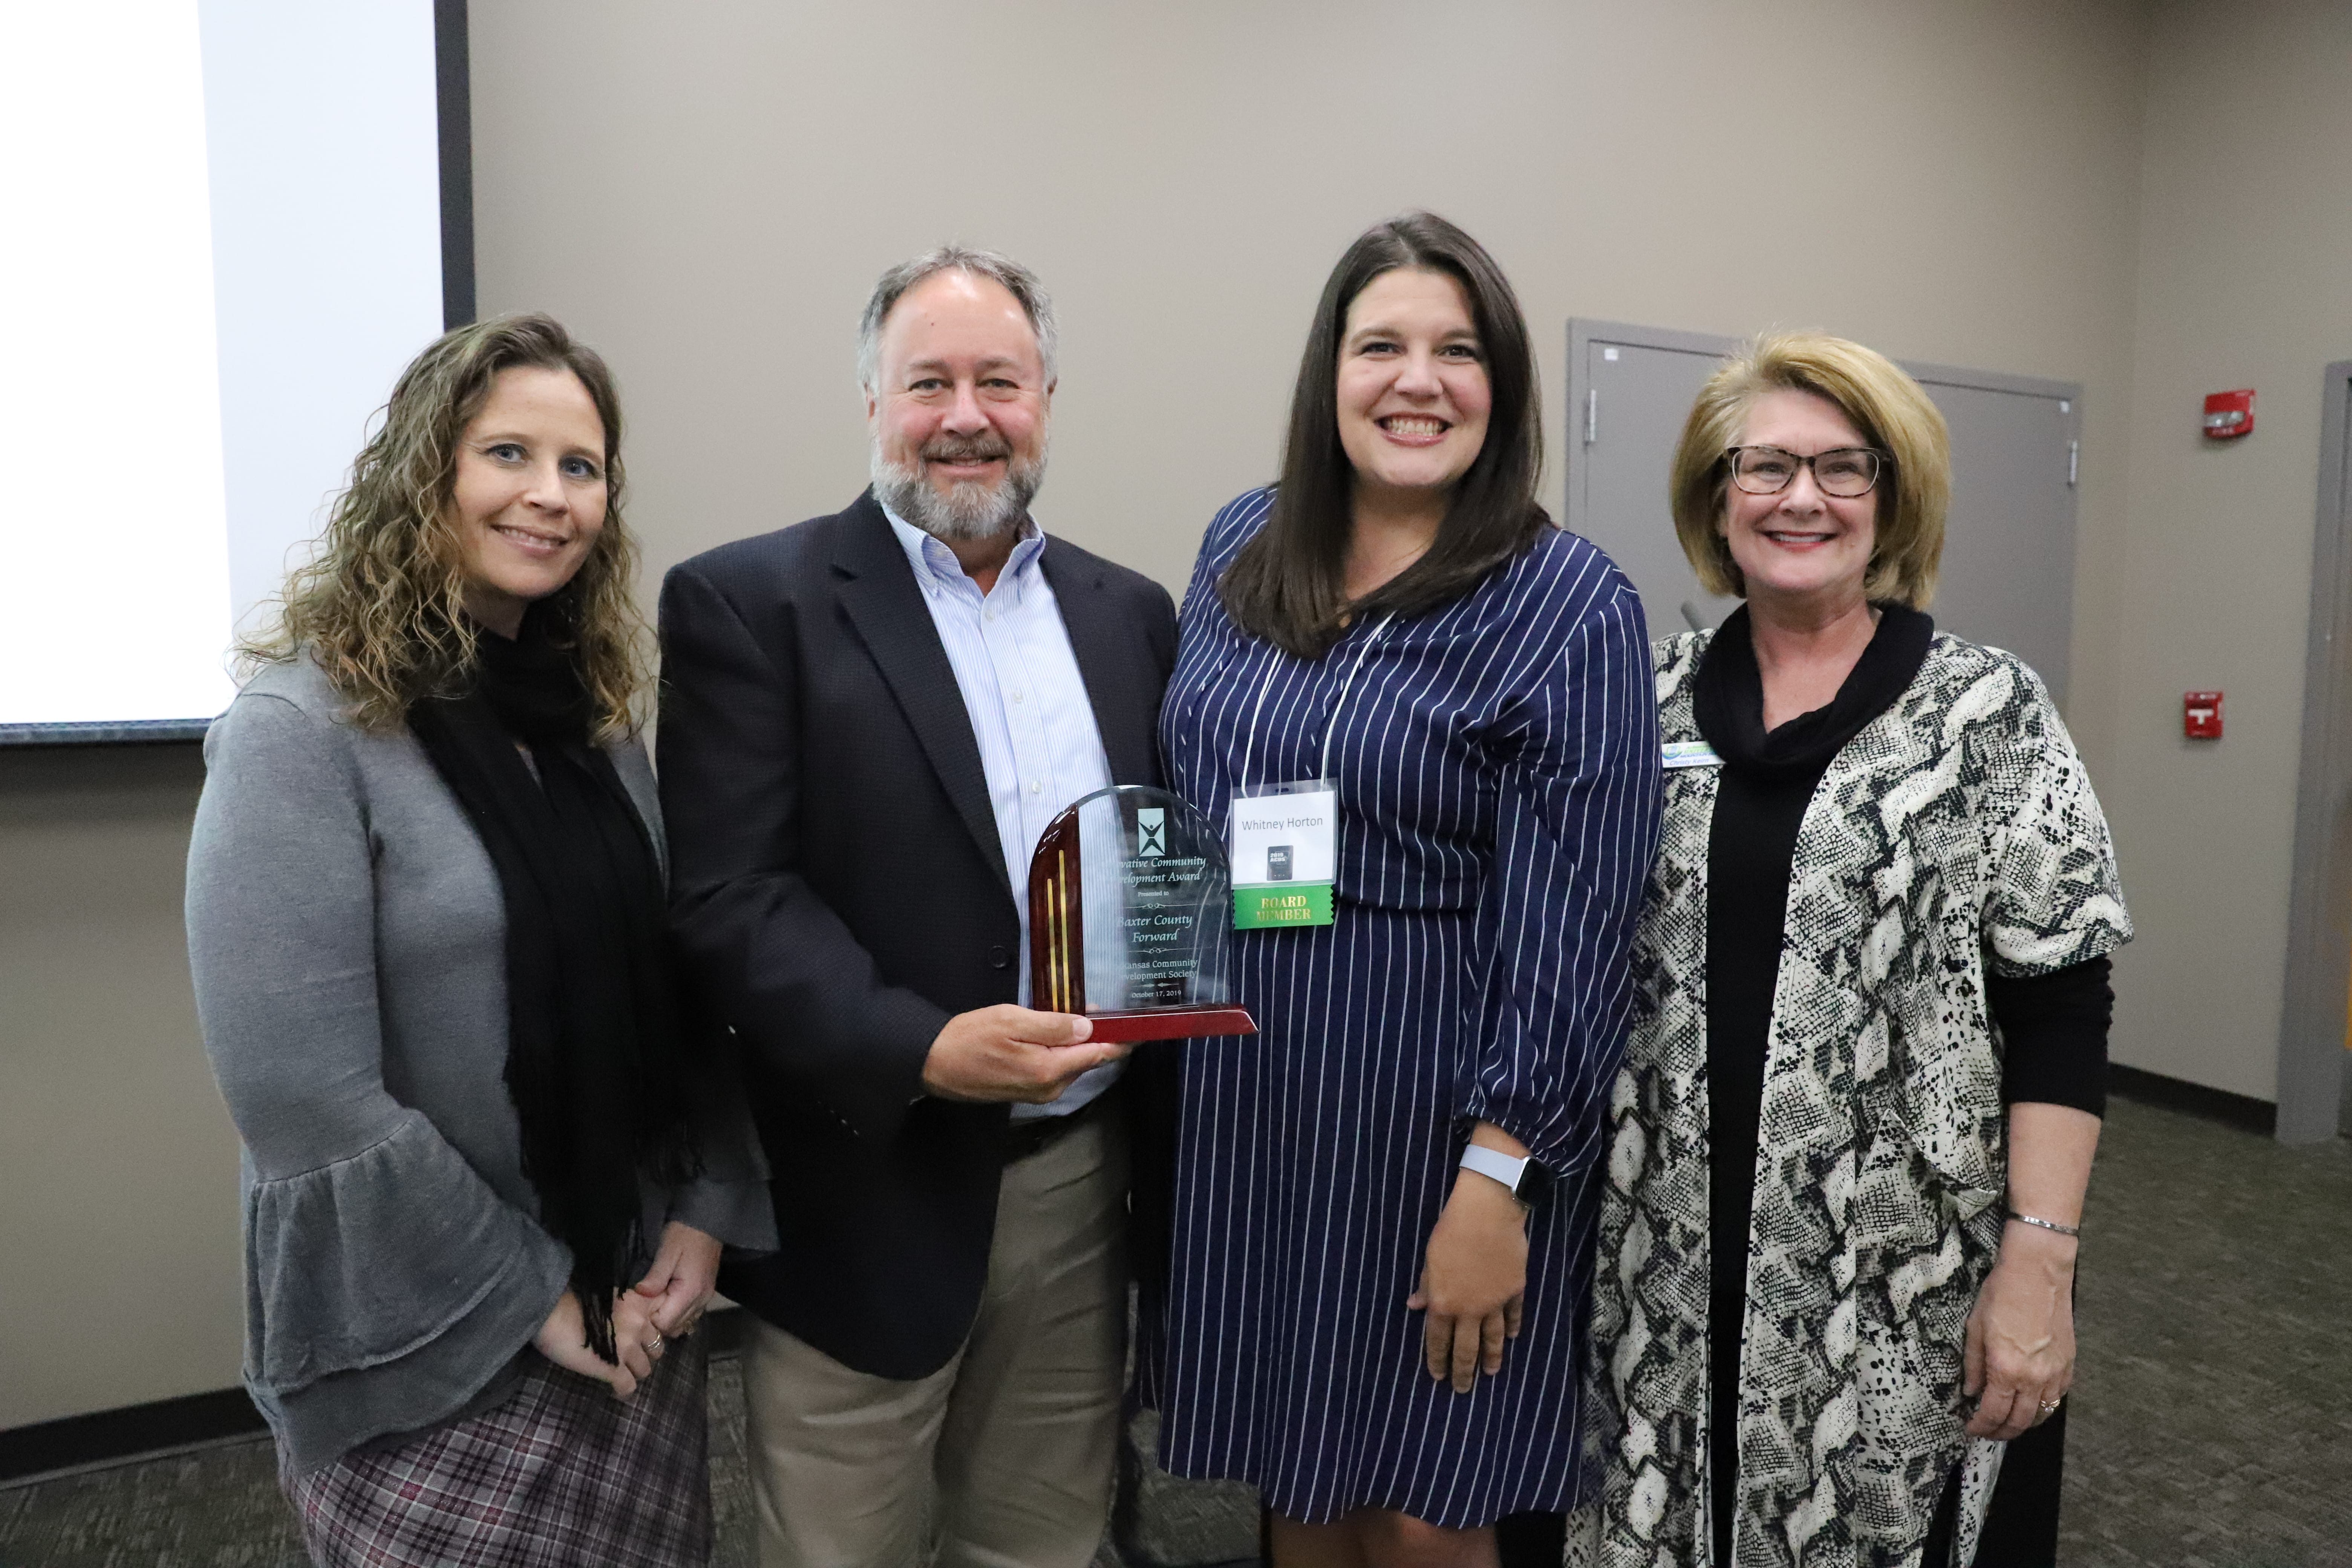 Receiving the Innovative Community Development Award for Baxter County Forward are Angela Broome, Jeff Pipkin, and Christy Keirn. Presenting the award is Whitney Horton, Vice President of the Arkansas Community Development Society (third from the left).